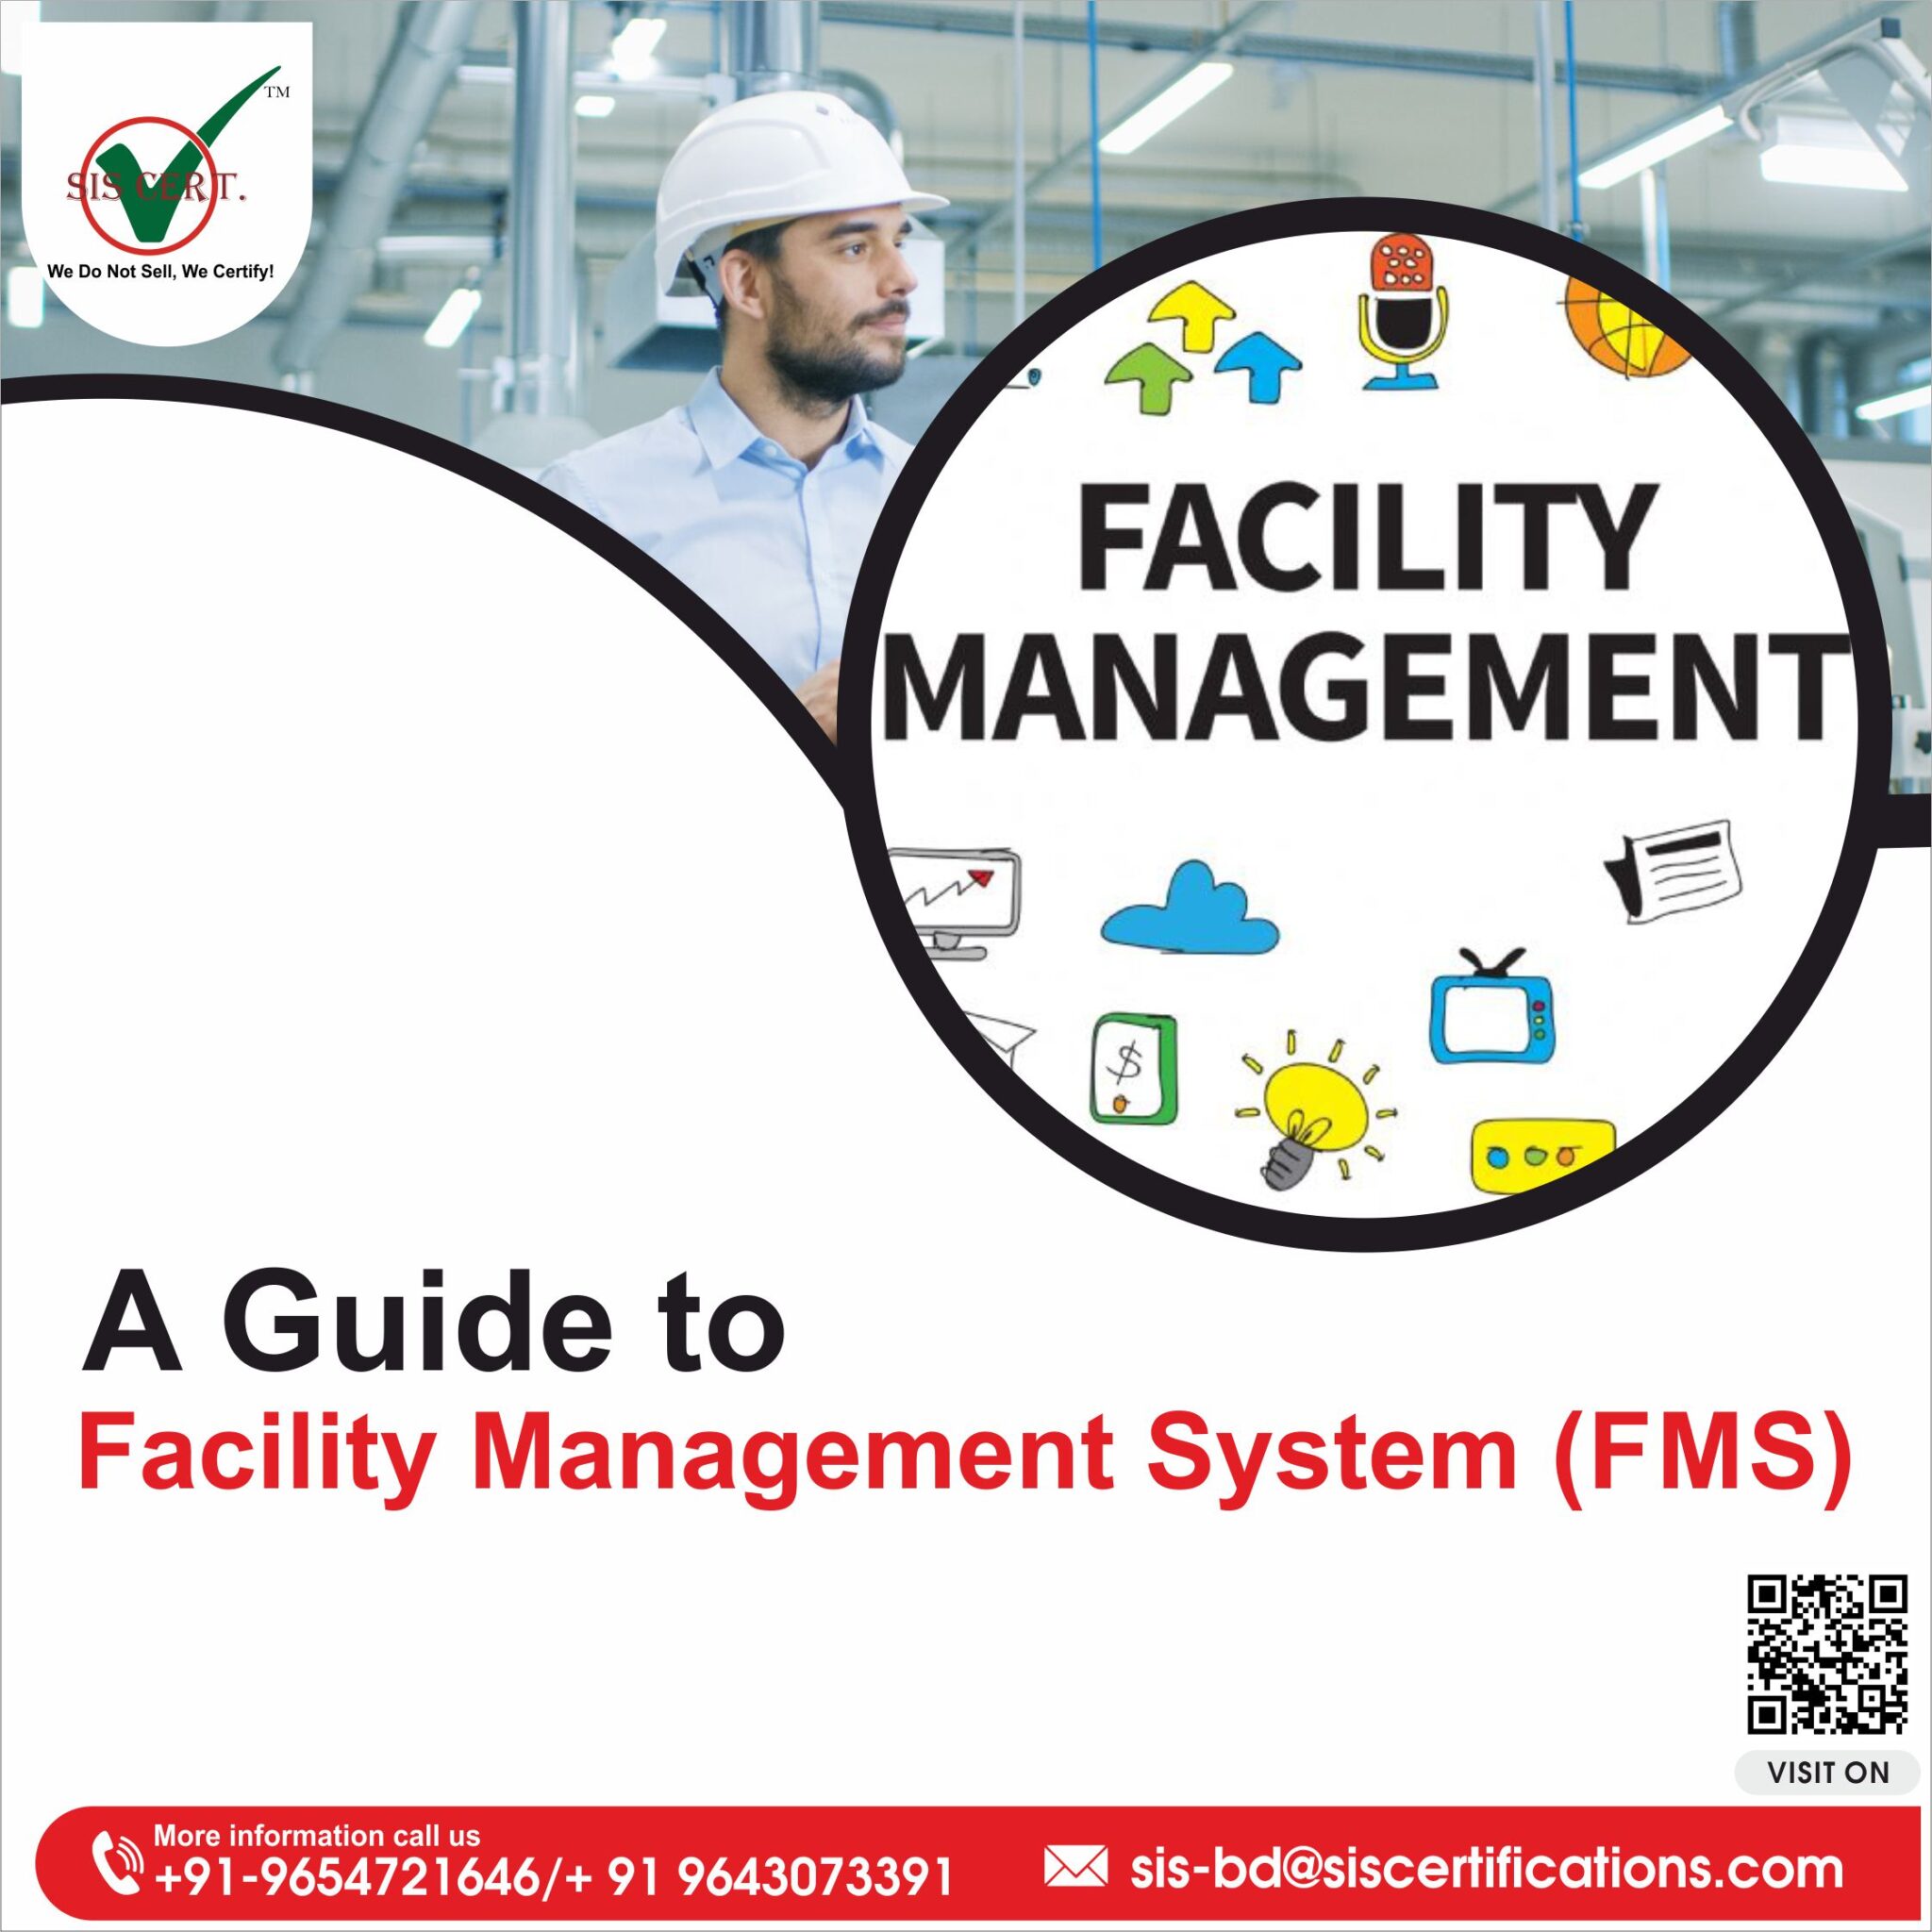 A Guide to Facility Management System (FMS)